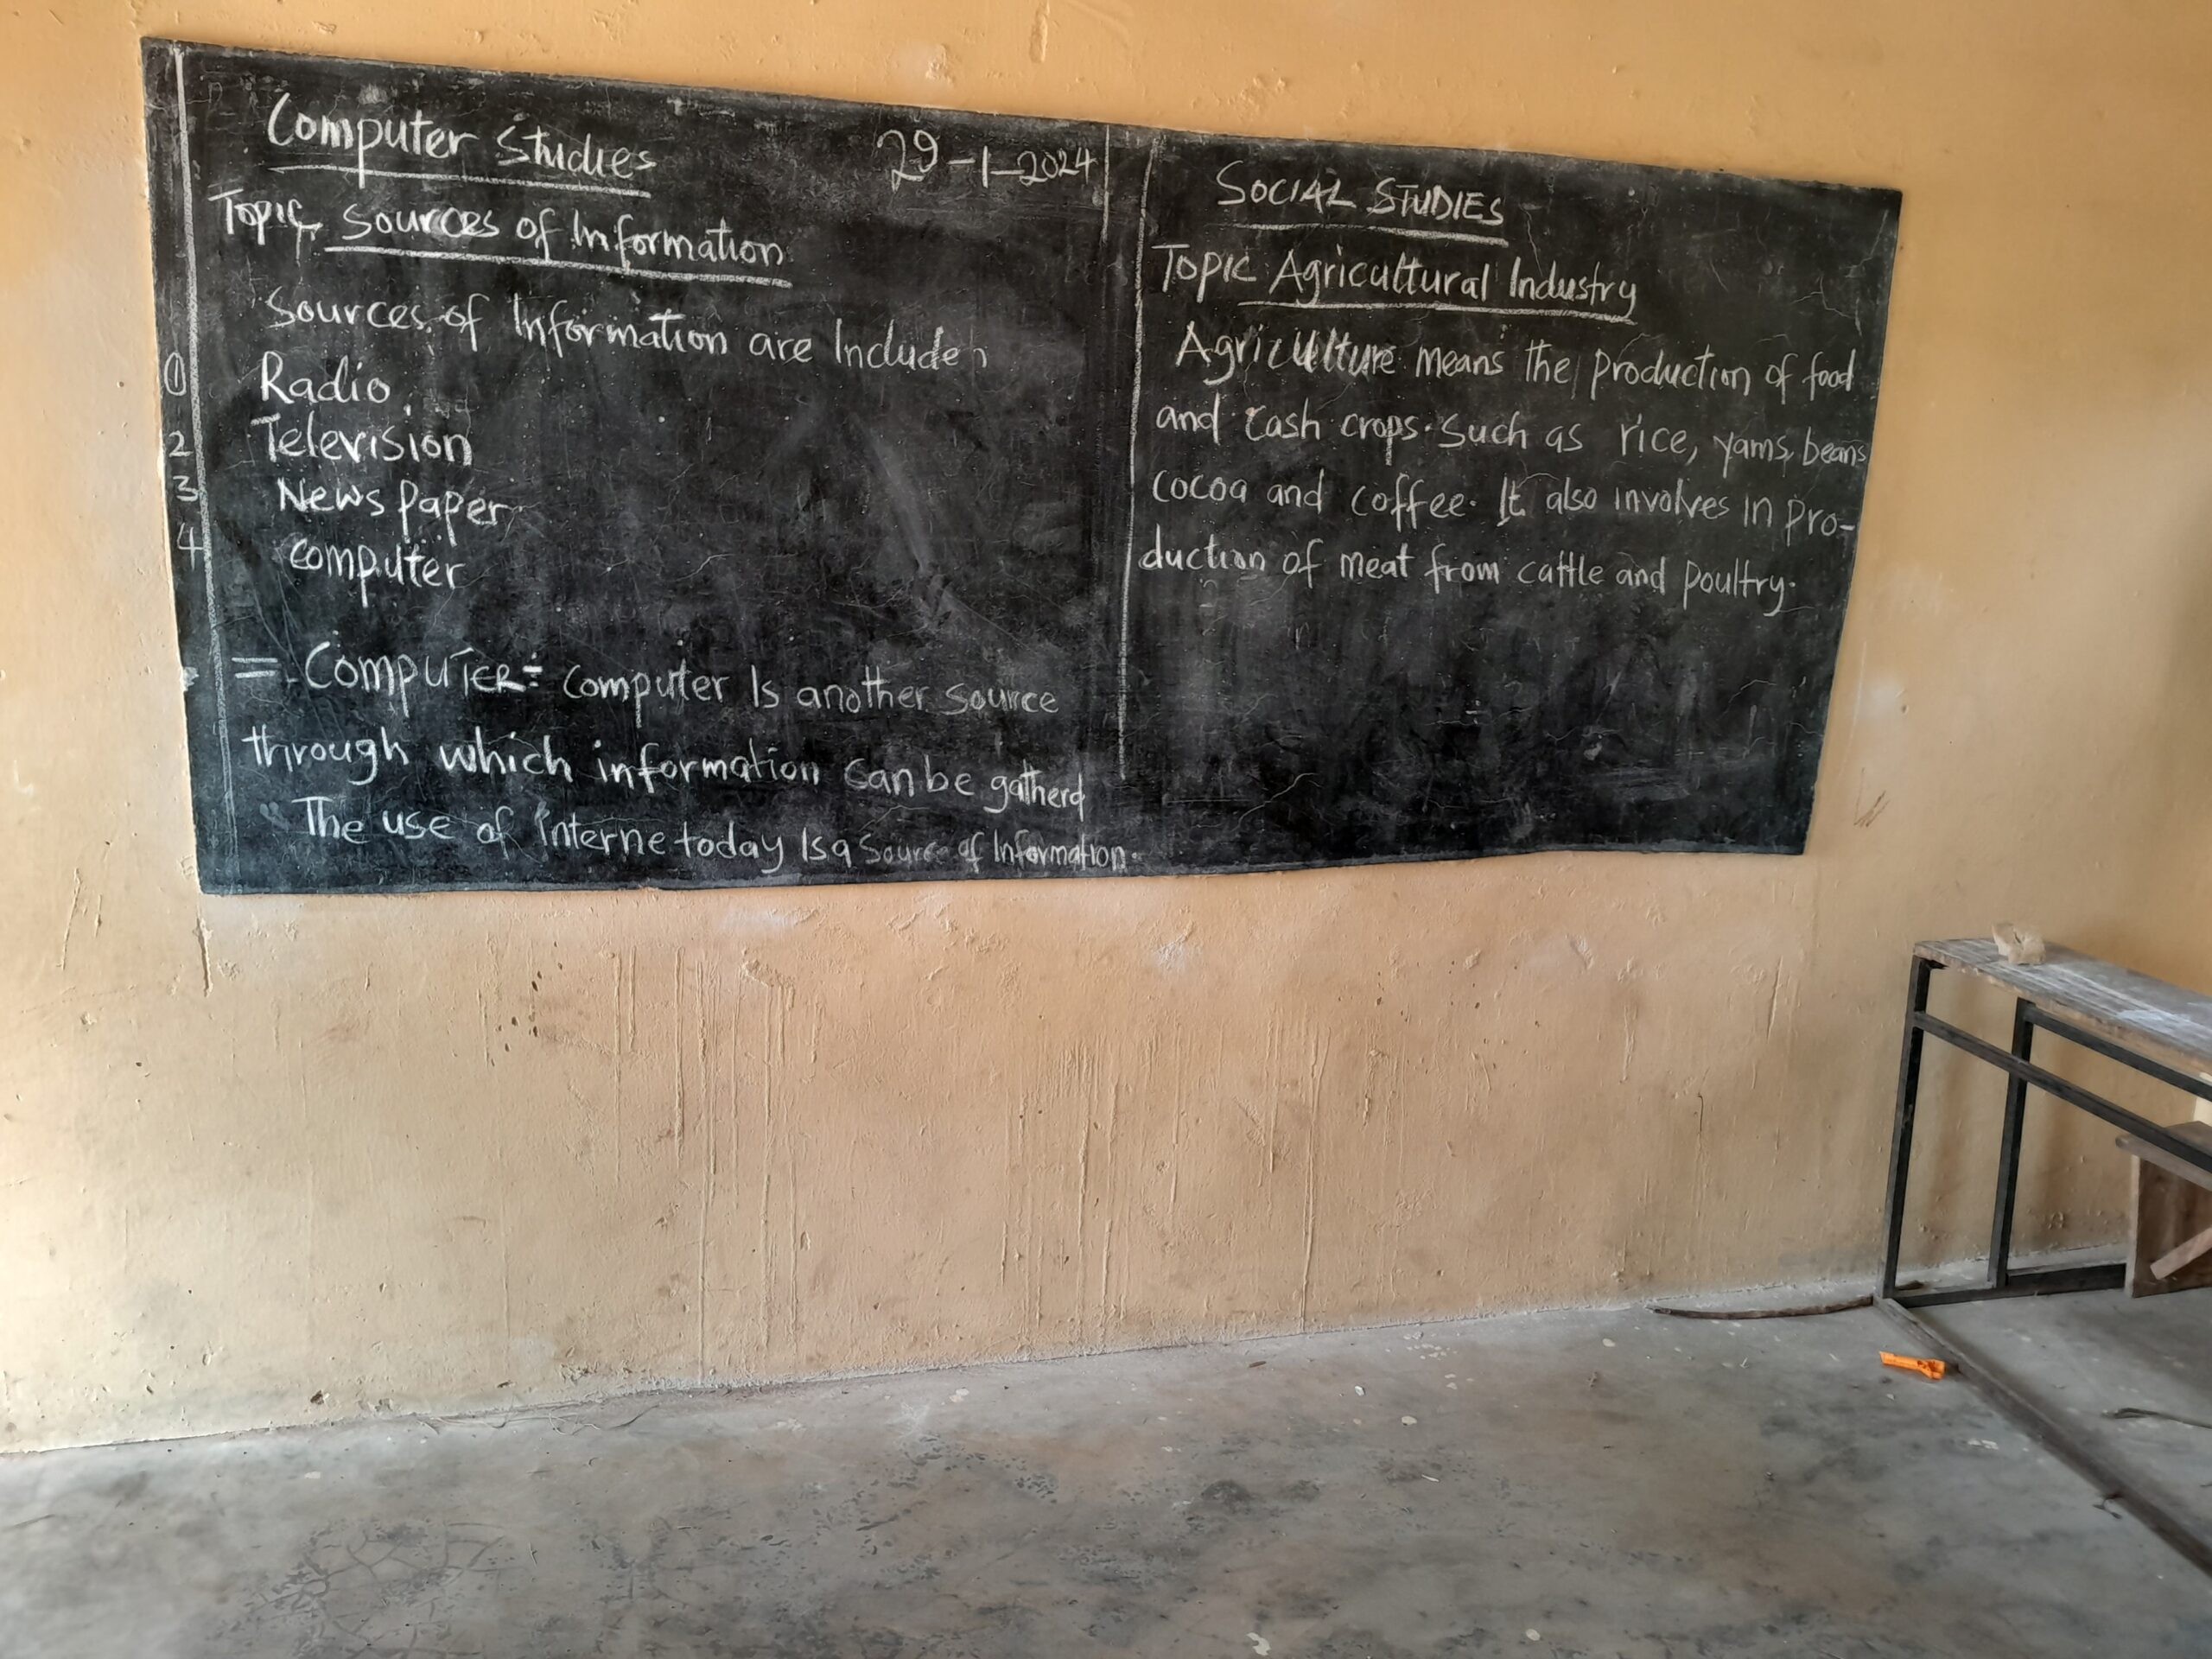 Abubakar Abdullahi was teaching the students a concept on Agricultural Science when I visited the school. Photo Yahuza Bawage.